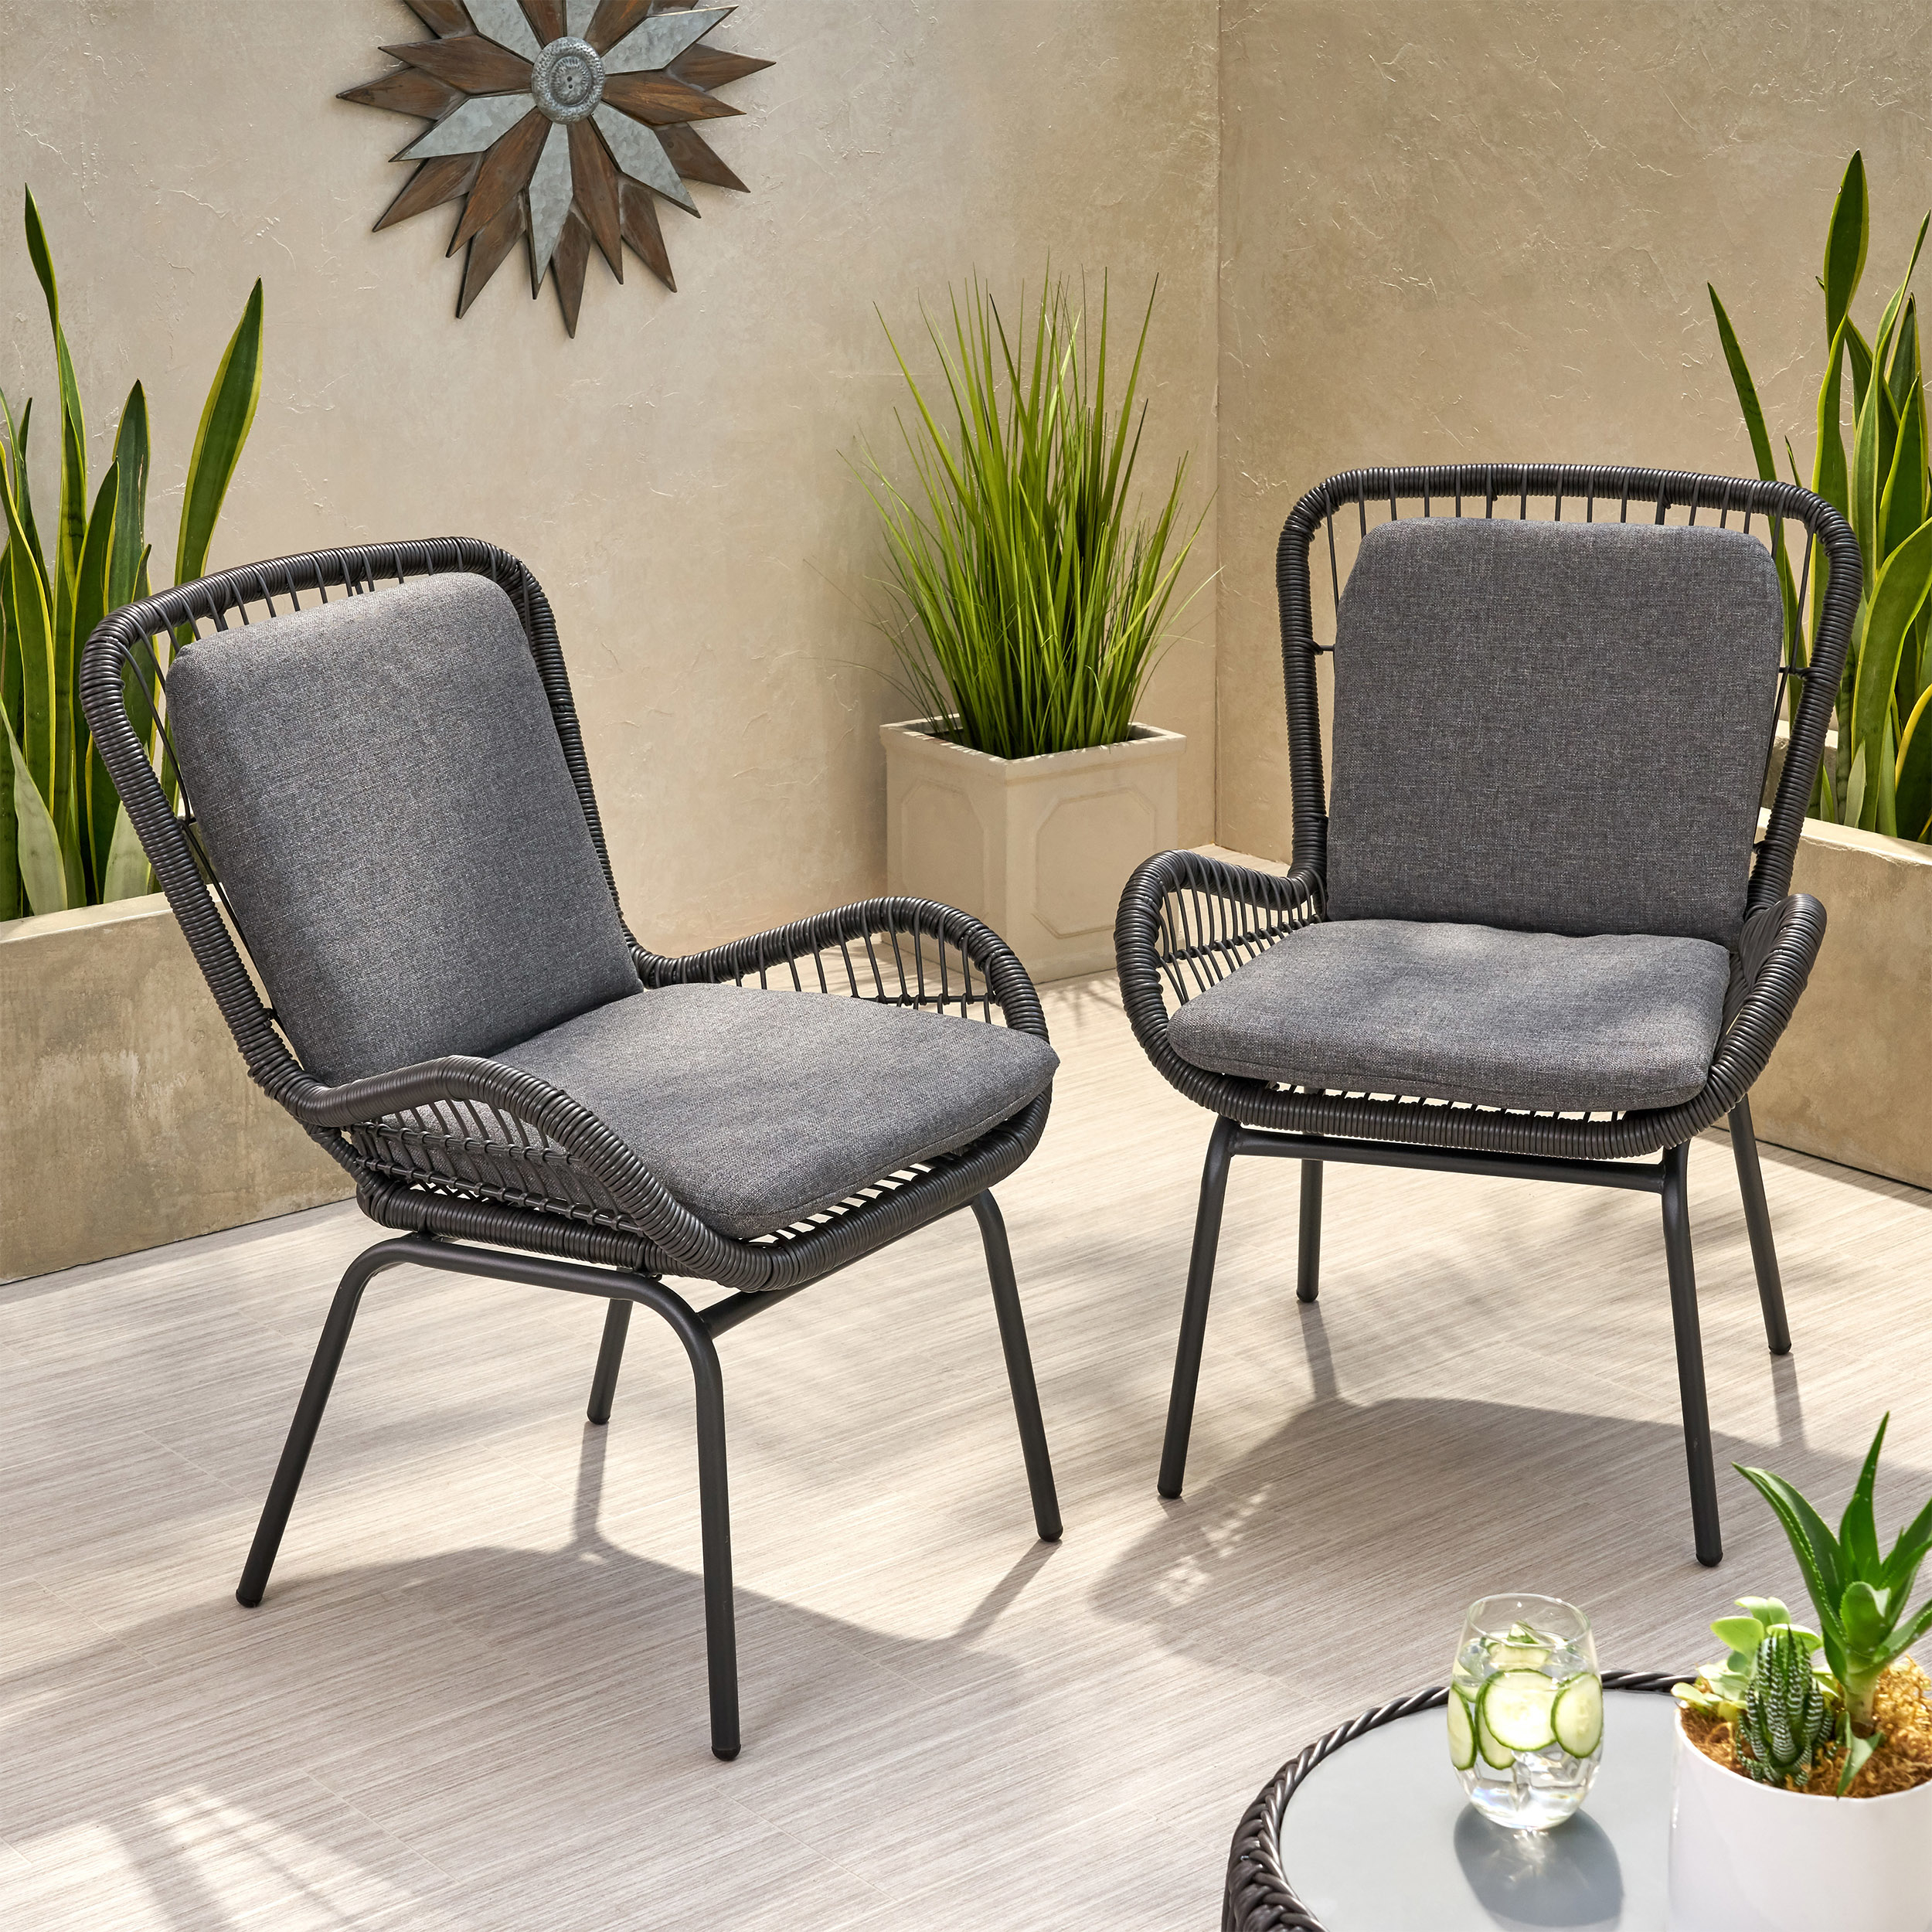 Alice Outdoor Wicker Club Chair With Cushions (Set Of 2) - Gray + Dark Gray